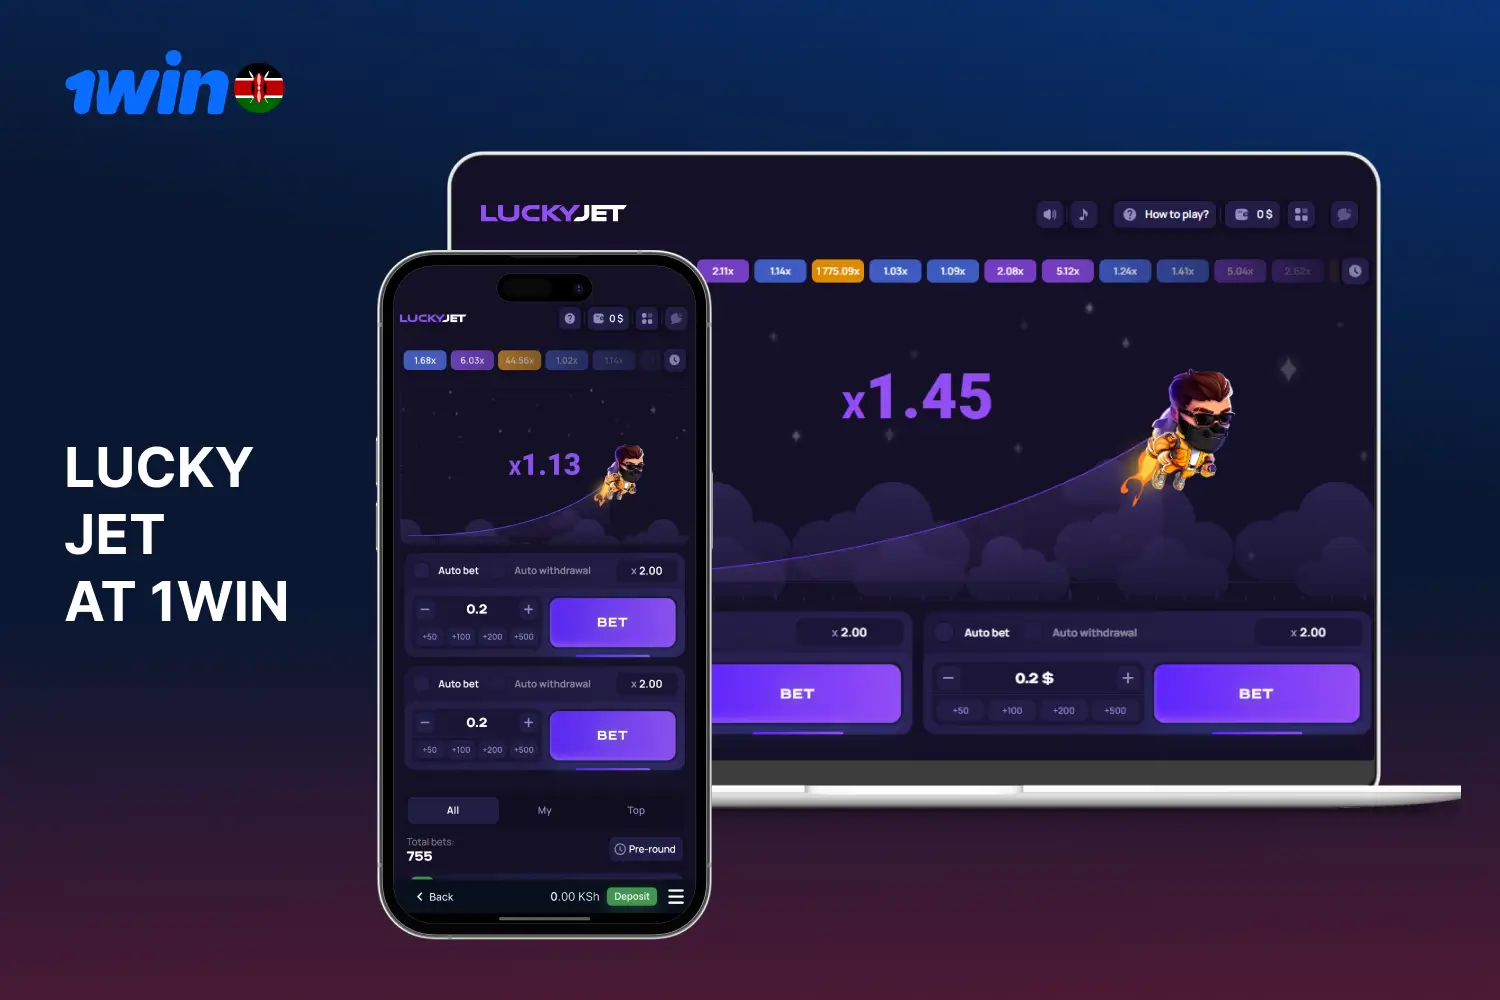 Kenyan users can play Lucky Jet at 1win online casino